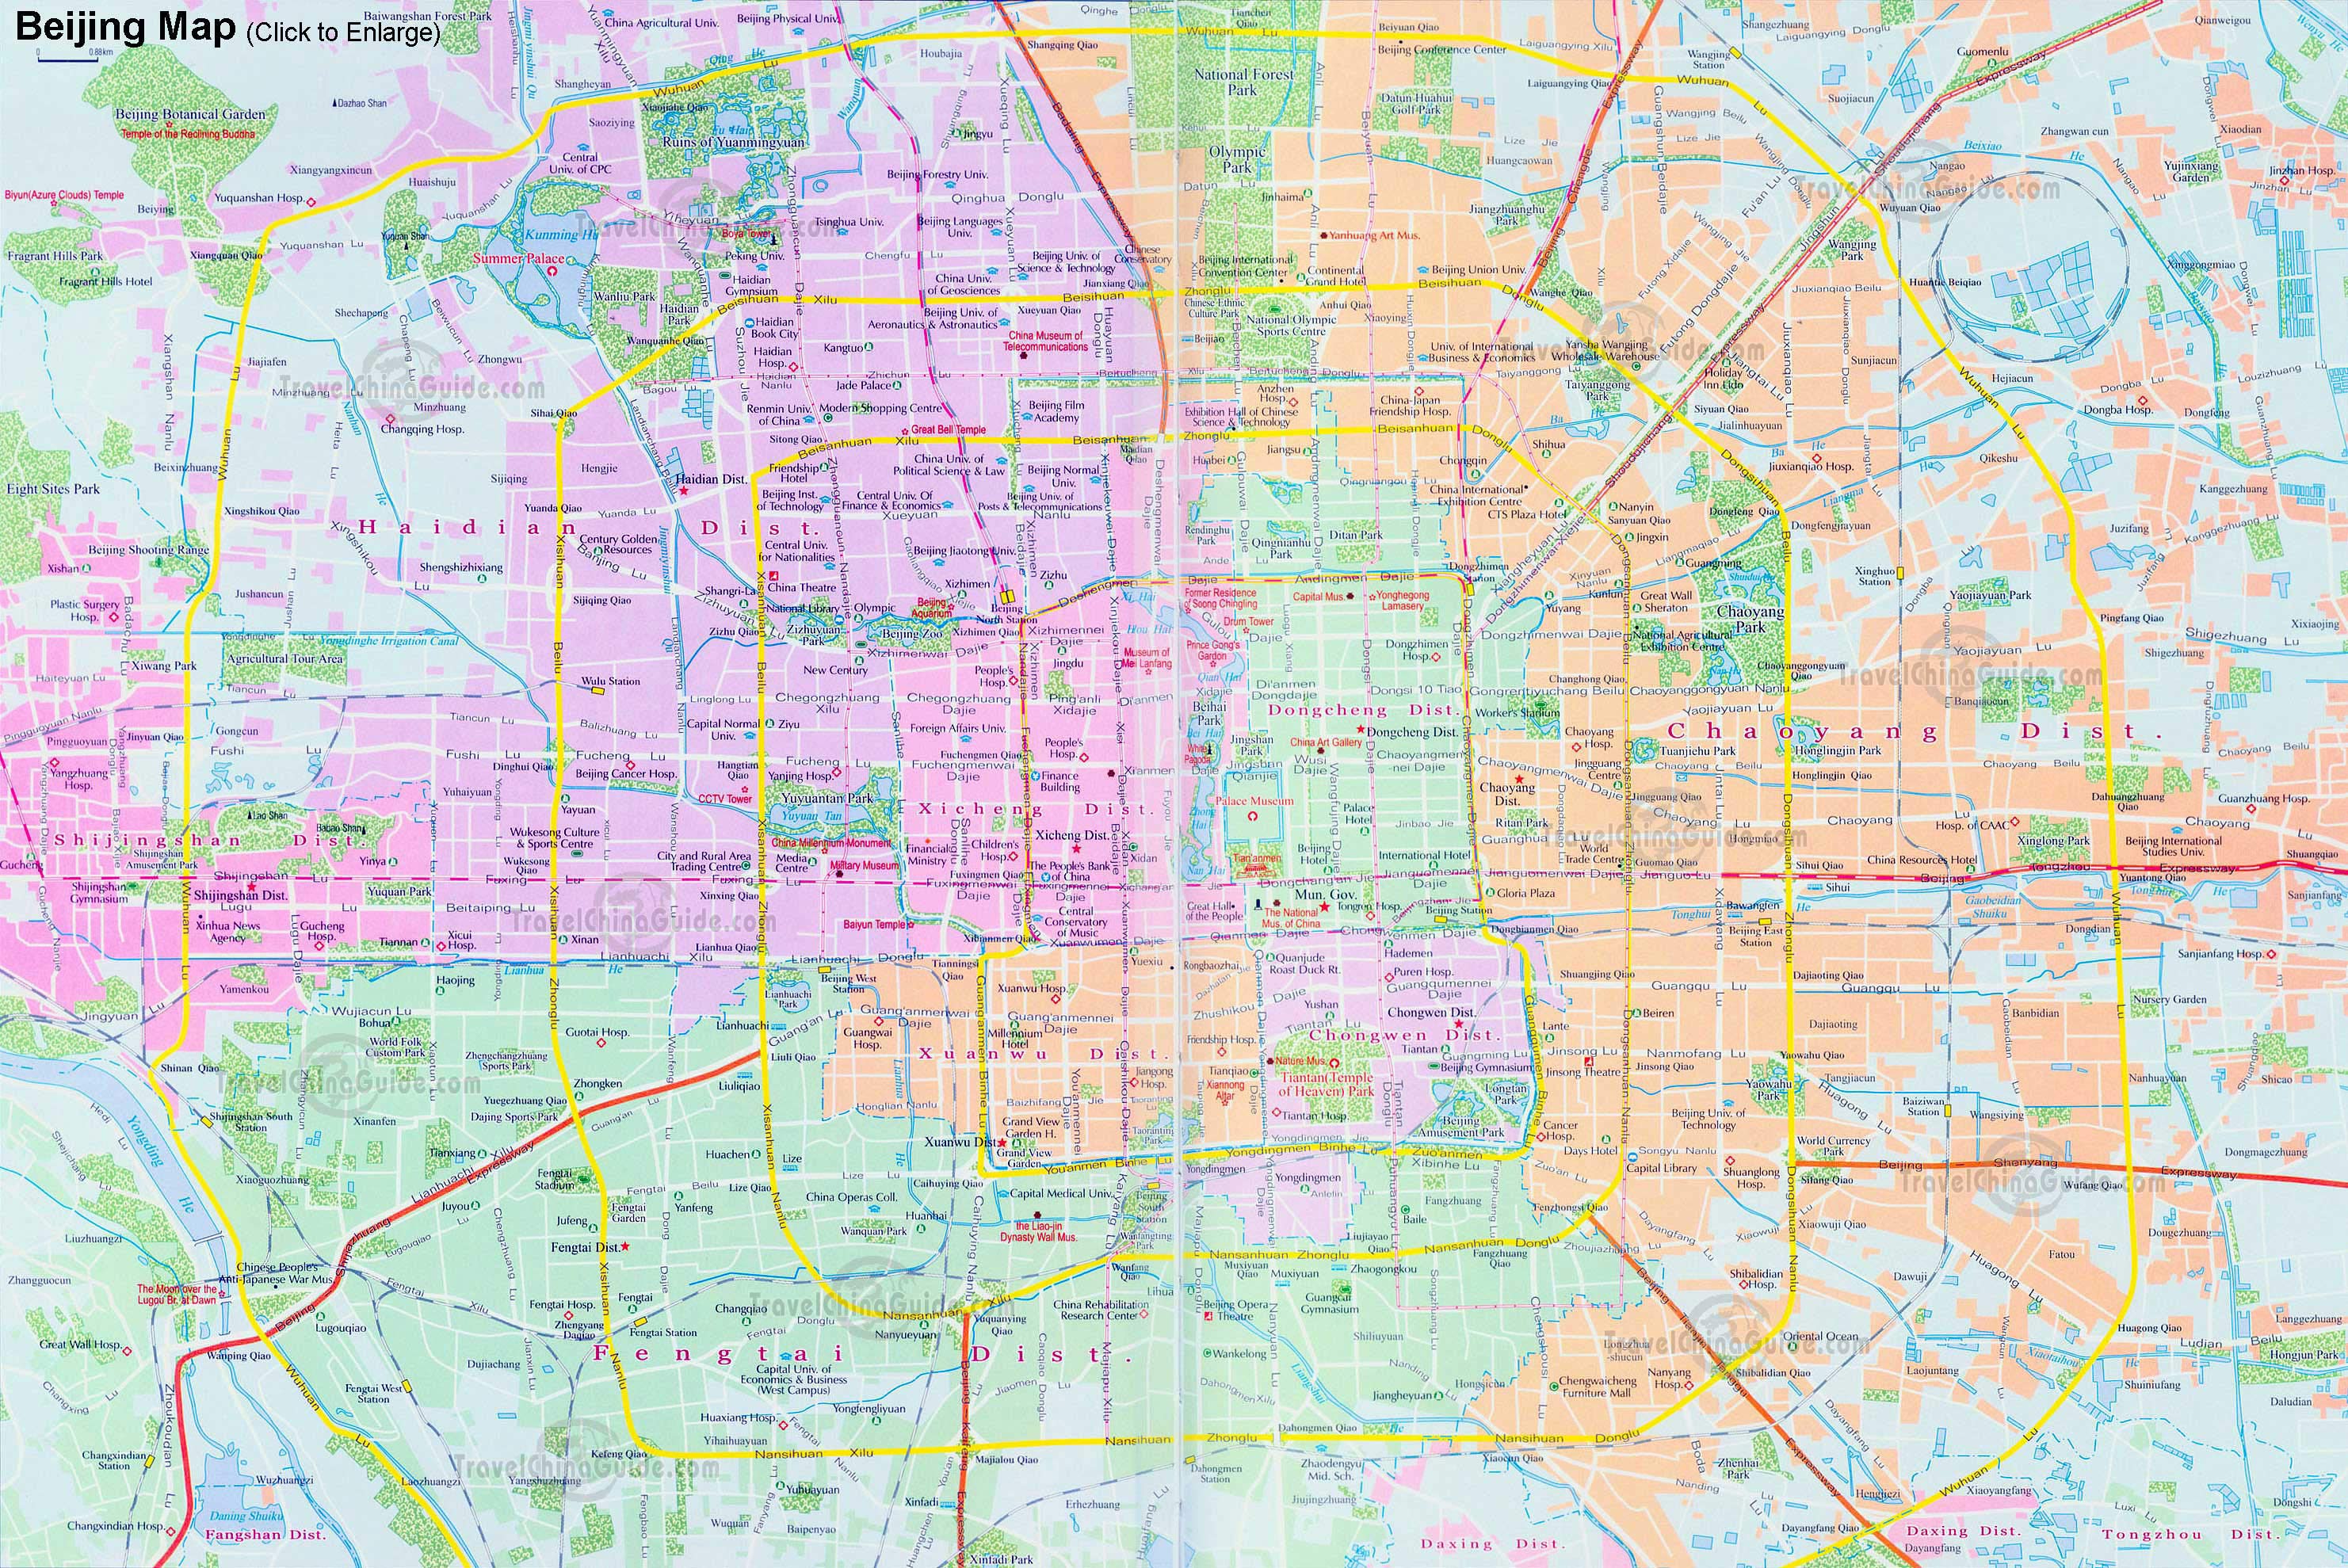 Beijing Maps: Attractions, Downtown & Districts, Streets